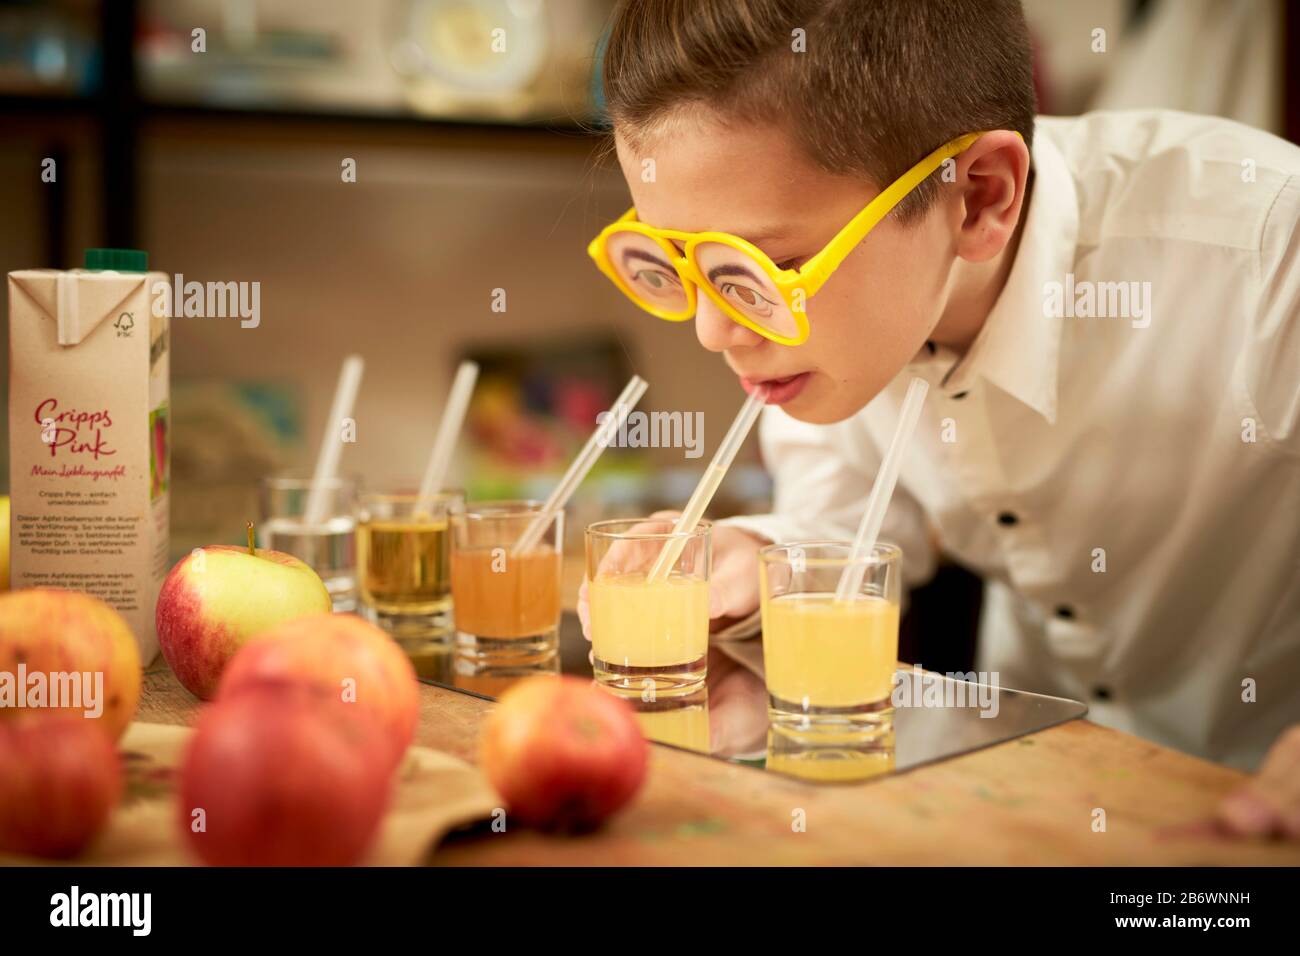 Children investigating food. A boy makes a blind tasting of various fruit juices. Learning according to the Reggio Pedagogy principle, playful understanding and discovery. Germany. Stock Photo